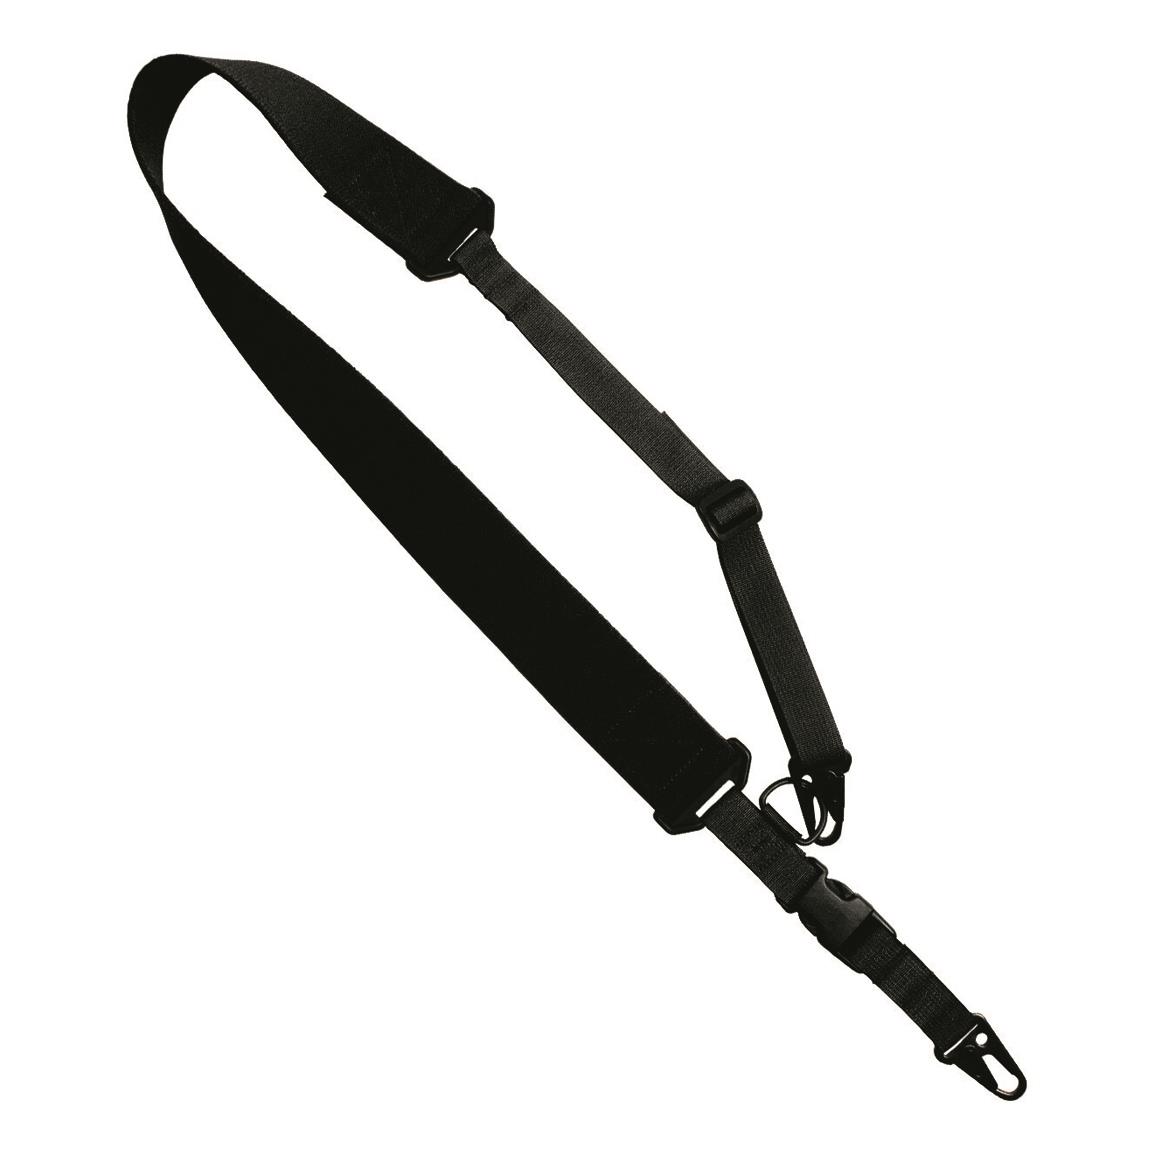 United States Tactical C2 2 to 1 Point Sling, Black